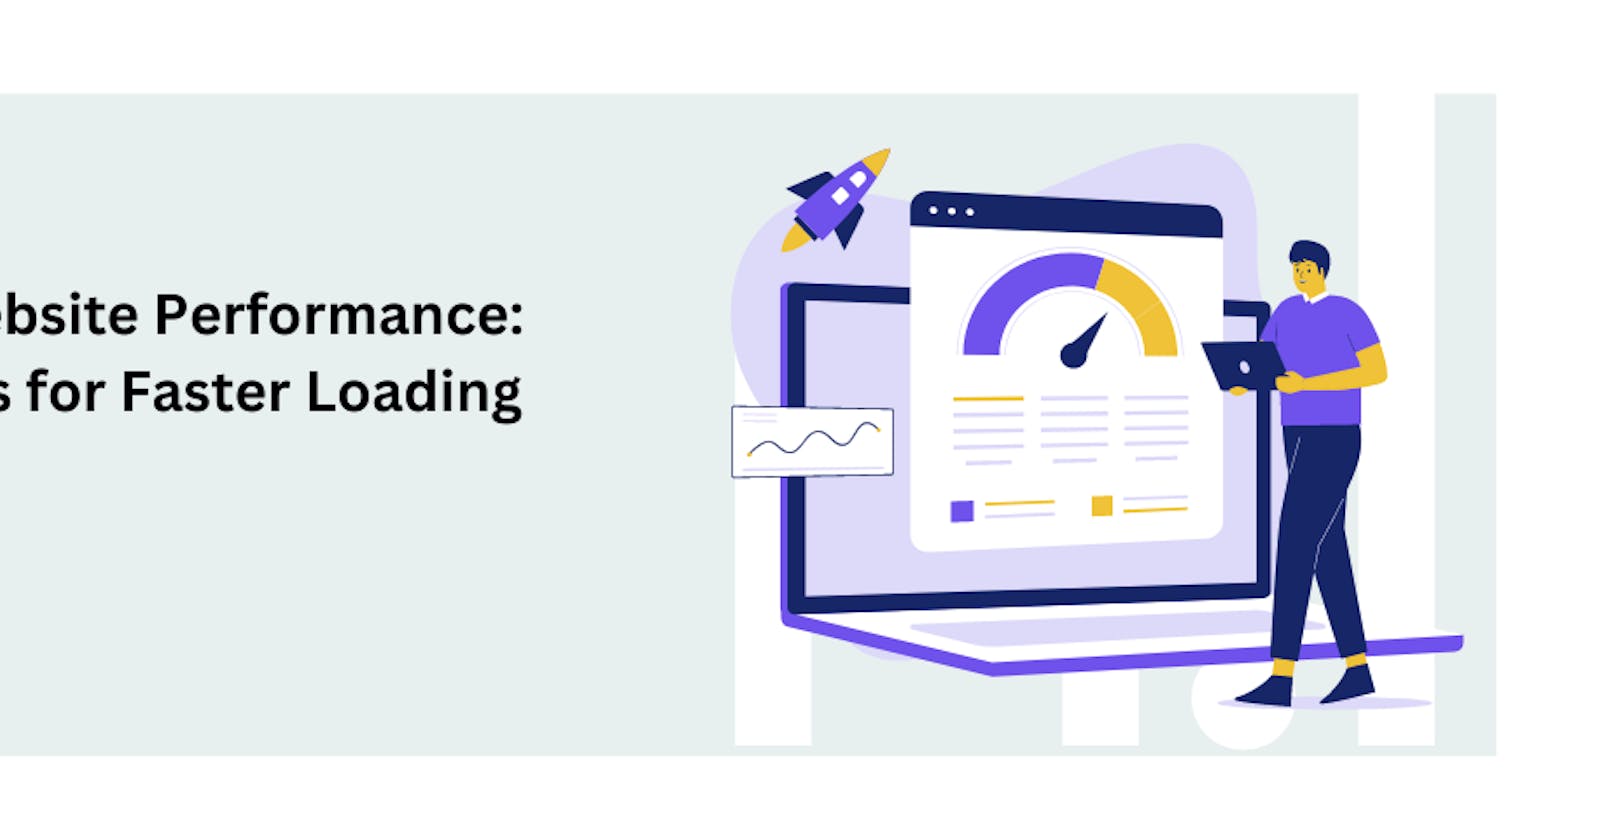 Optimizing Website Performance: Tips and Tricks for Faster Loading Times